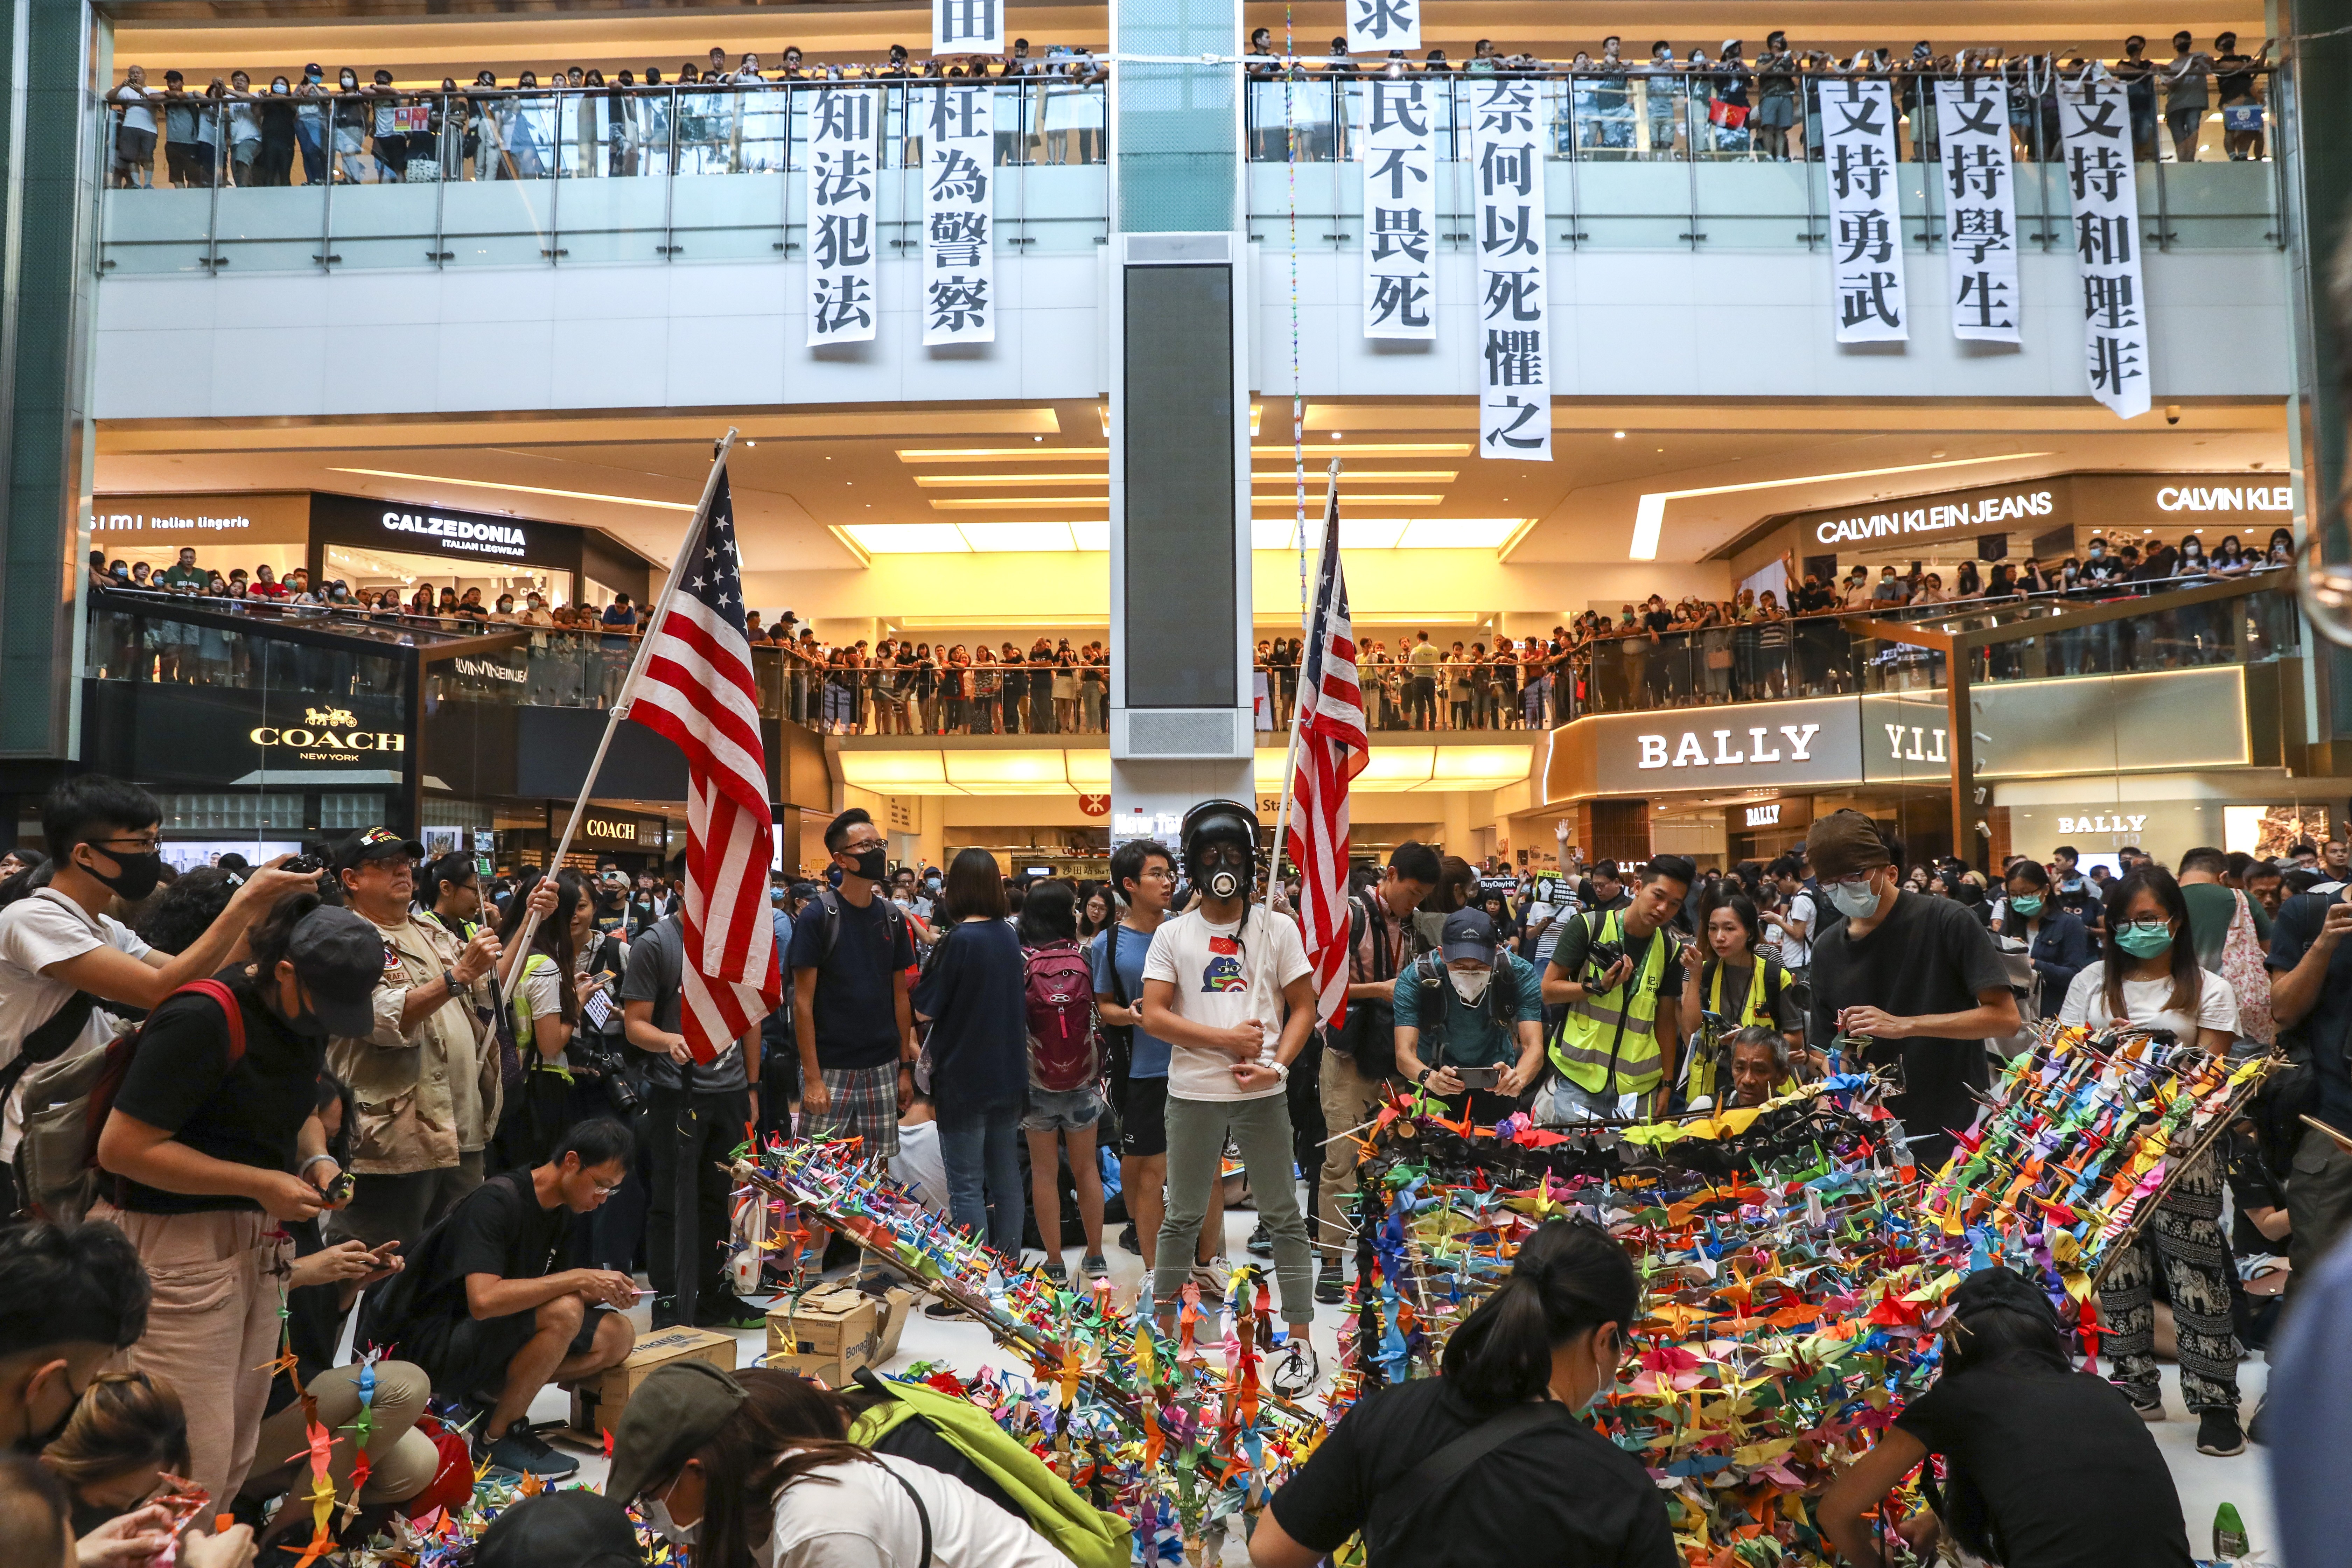 Protesters gather at New Town Plaza in Sha Tin on September 22. Sun Hung Kai Properties, the mall’s owner, has said it will help tenants affected by the protests. Photo: Nora Tam